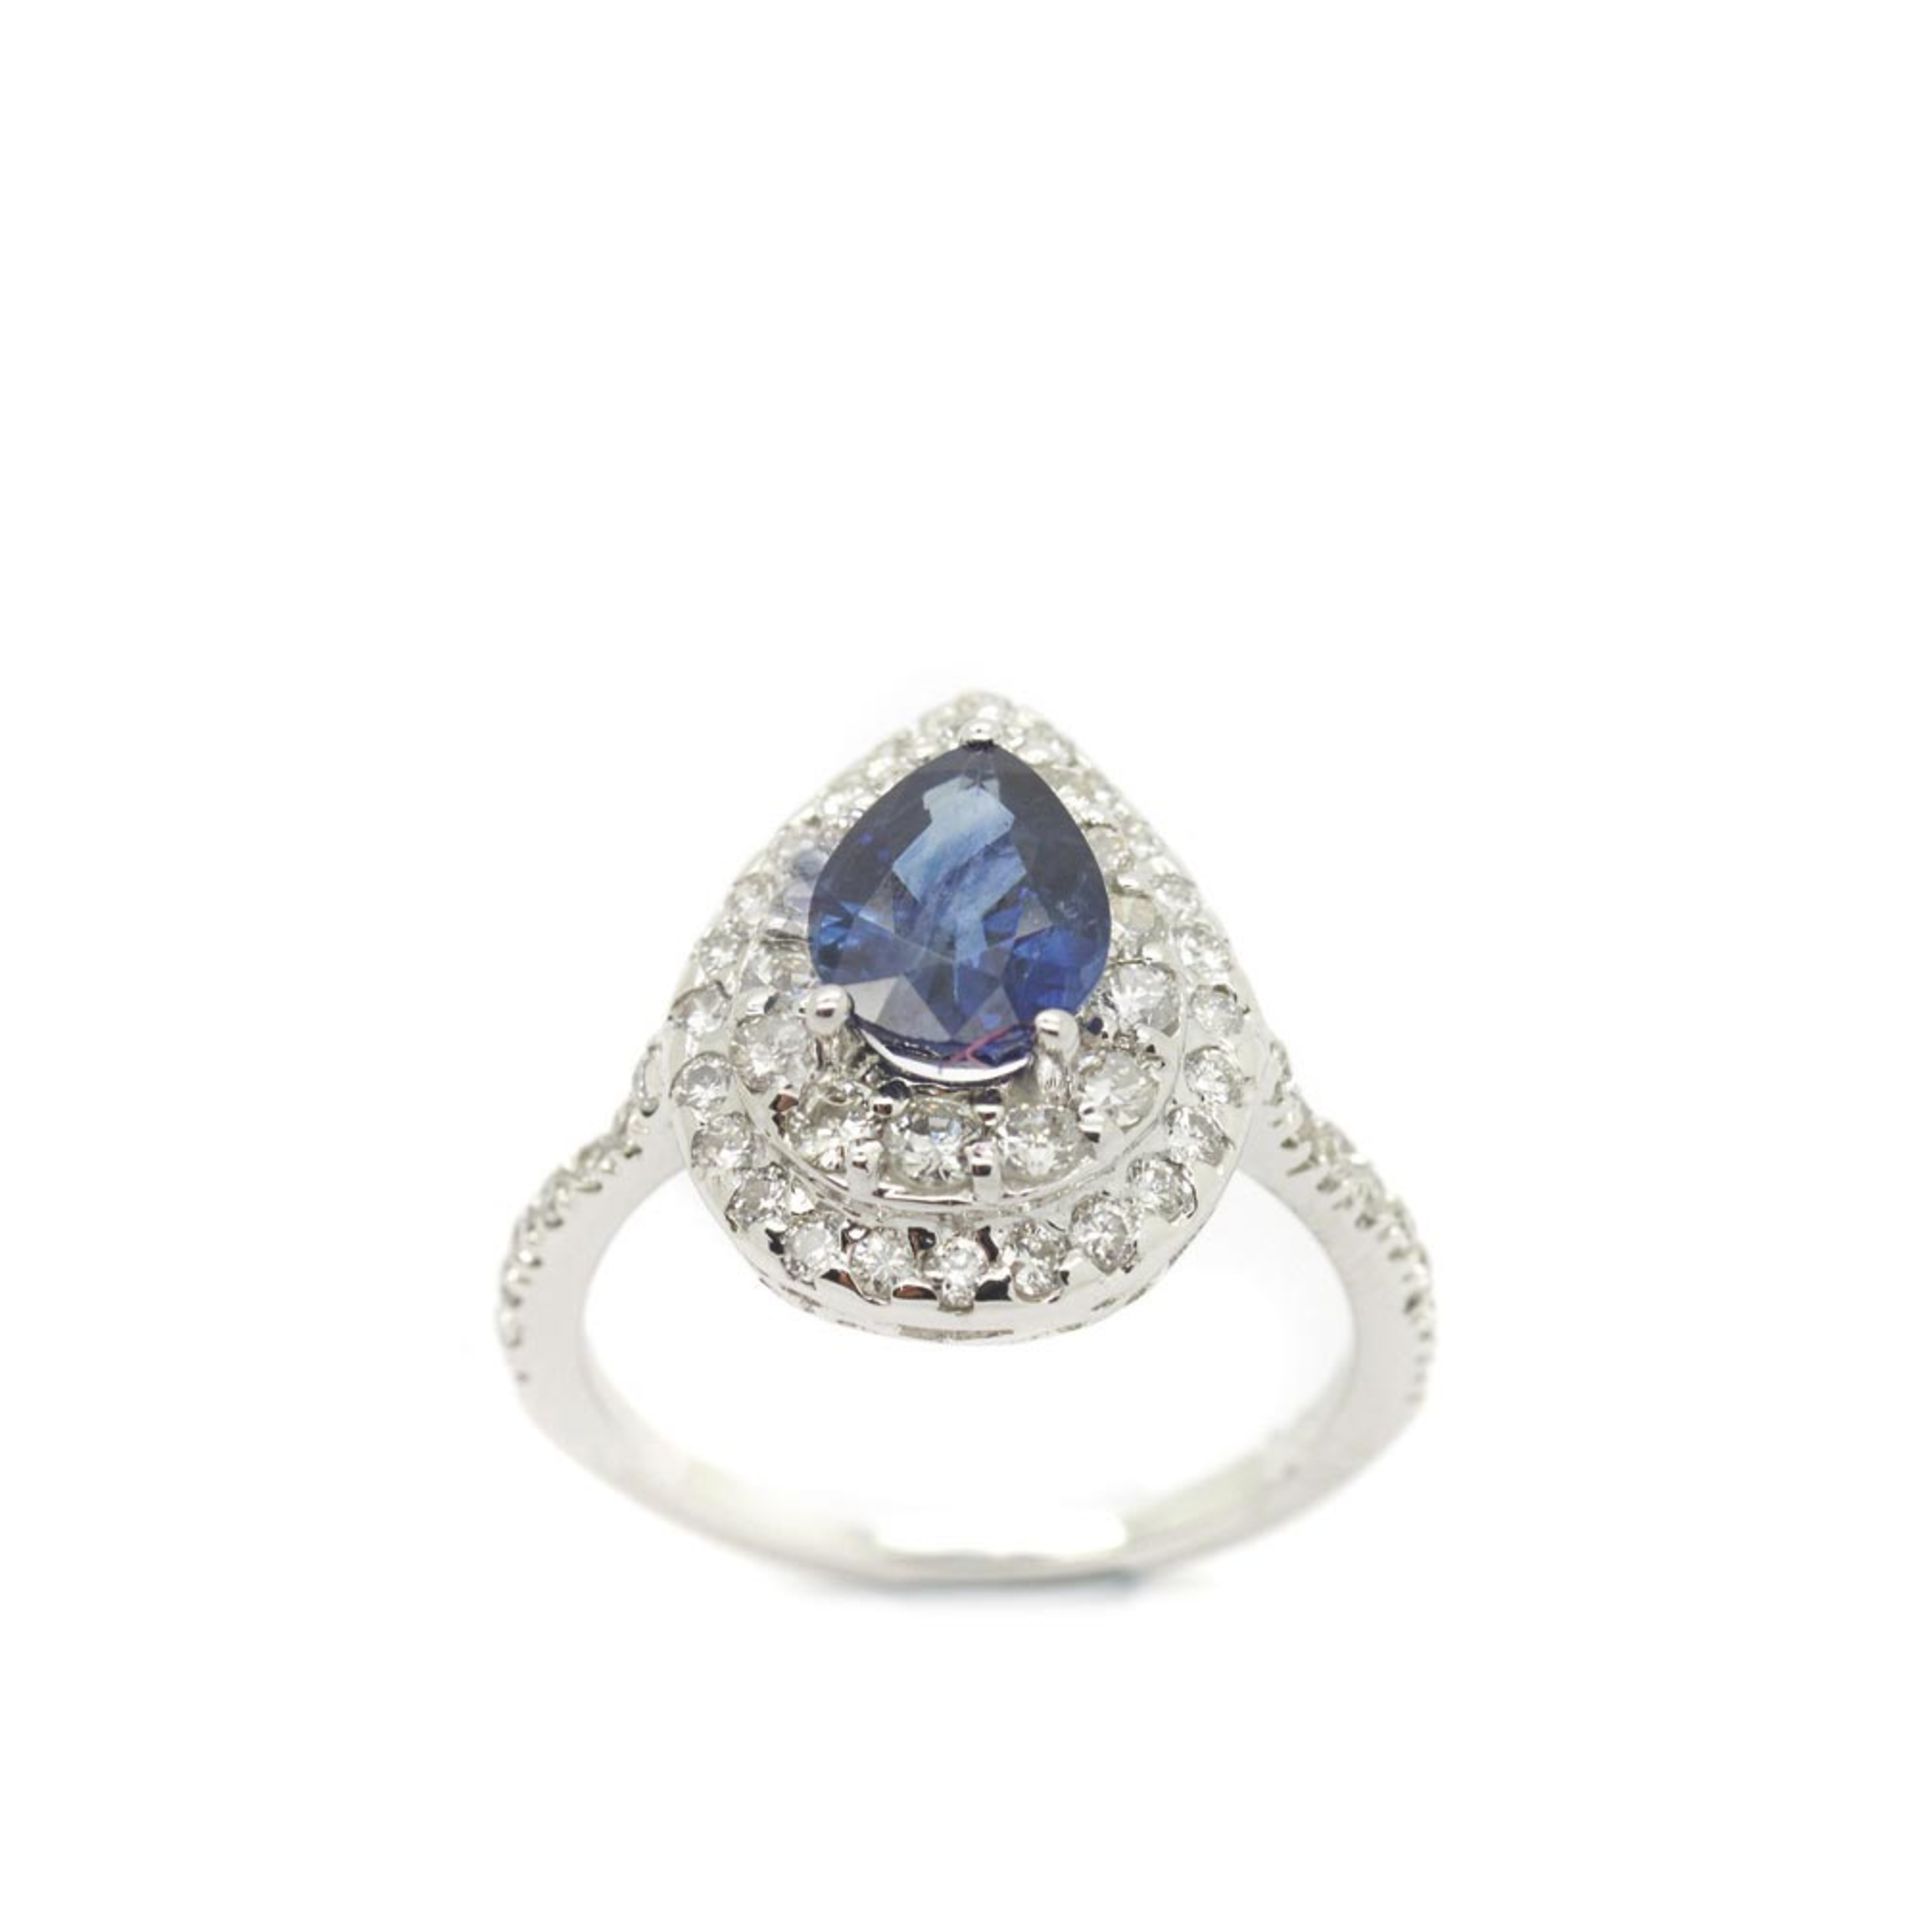 White gold, blue sapphire and diamonds ring